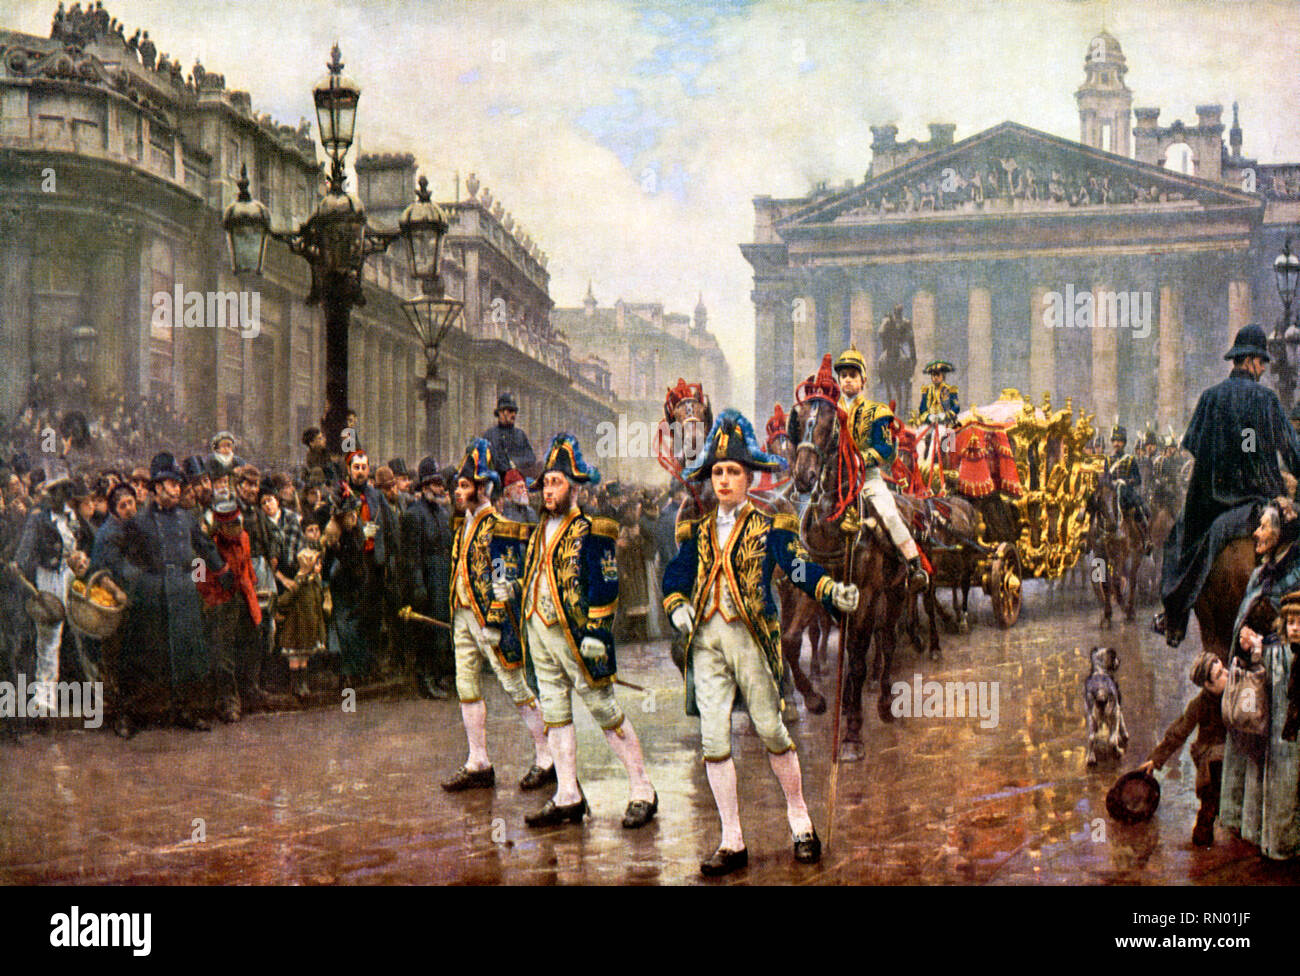 The Ninth of November, 1888. By William Logsdail (1859-1944). The Lord Mayor's Show, 9th November 1888. Logsdail's painting depicts Sir James Whitehead's procession of 1888 moving westwards from the Mansion House. Also visible are The Royal Exchange and Bank of England. Stock Photo